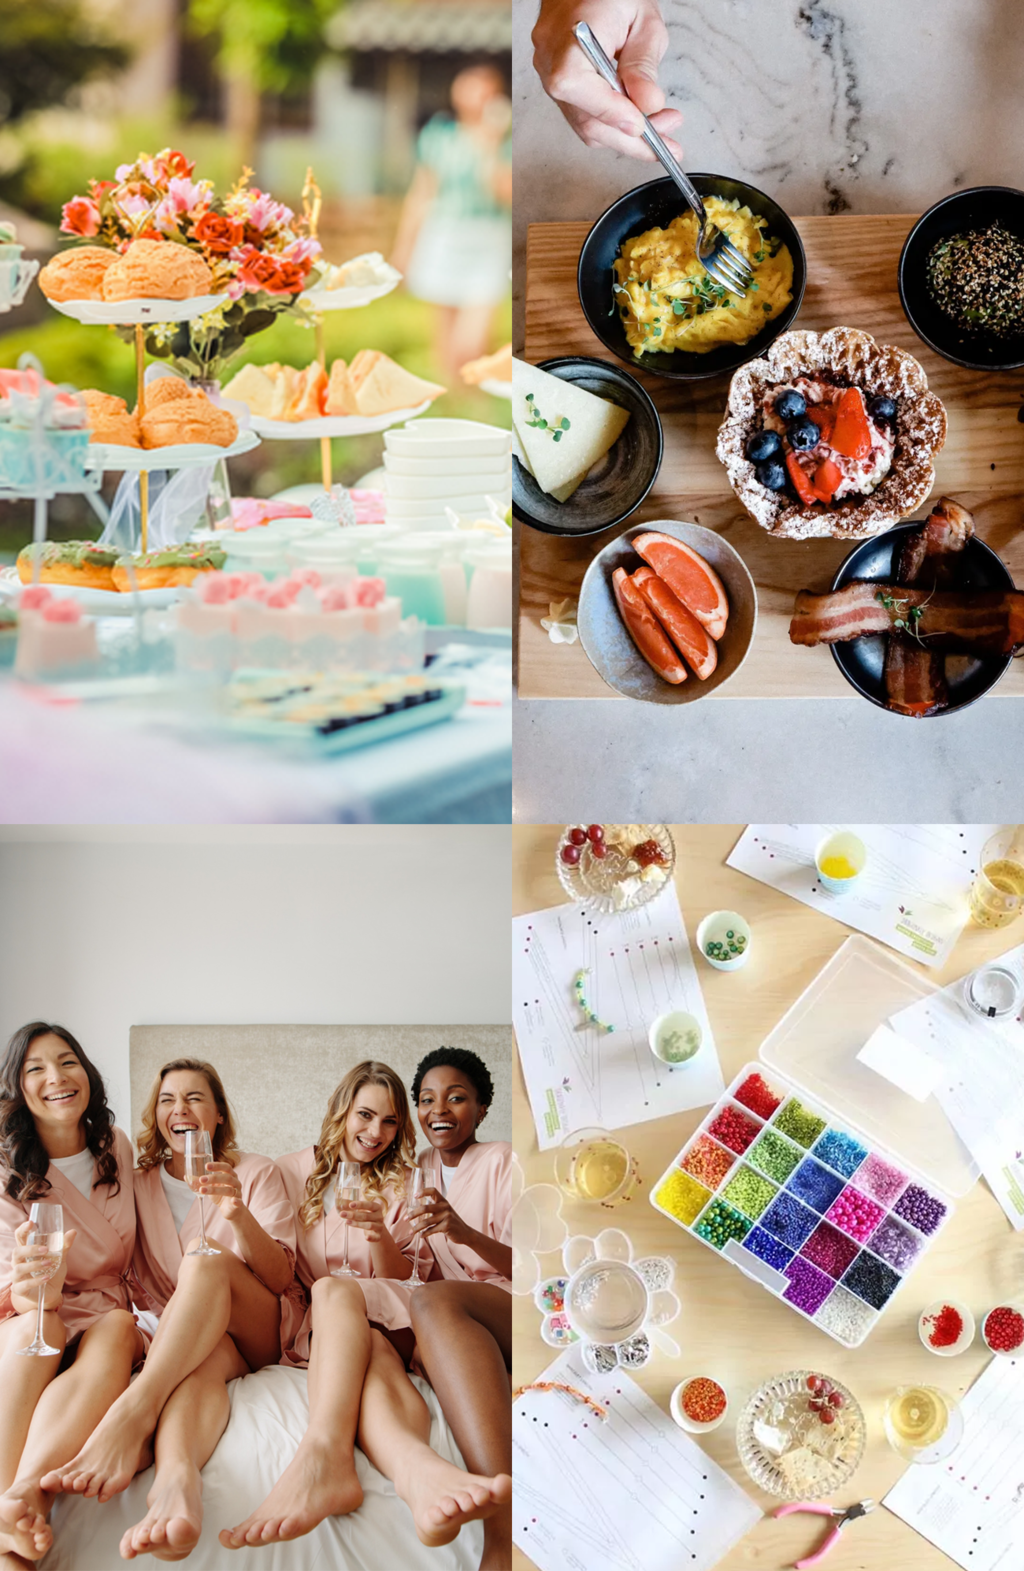 Fun Adult Slumber Party Ideas for the Perfect Girls Night In - Studio DIY